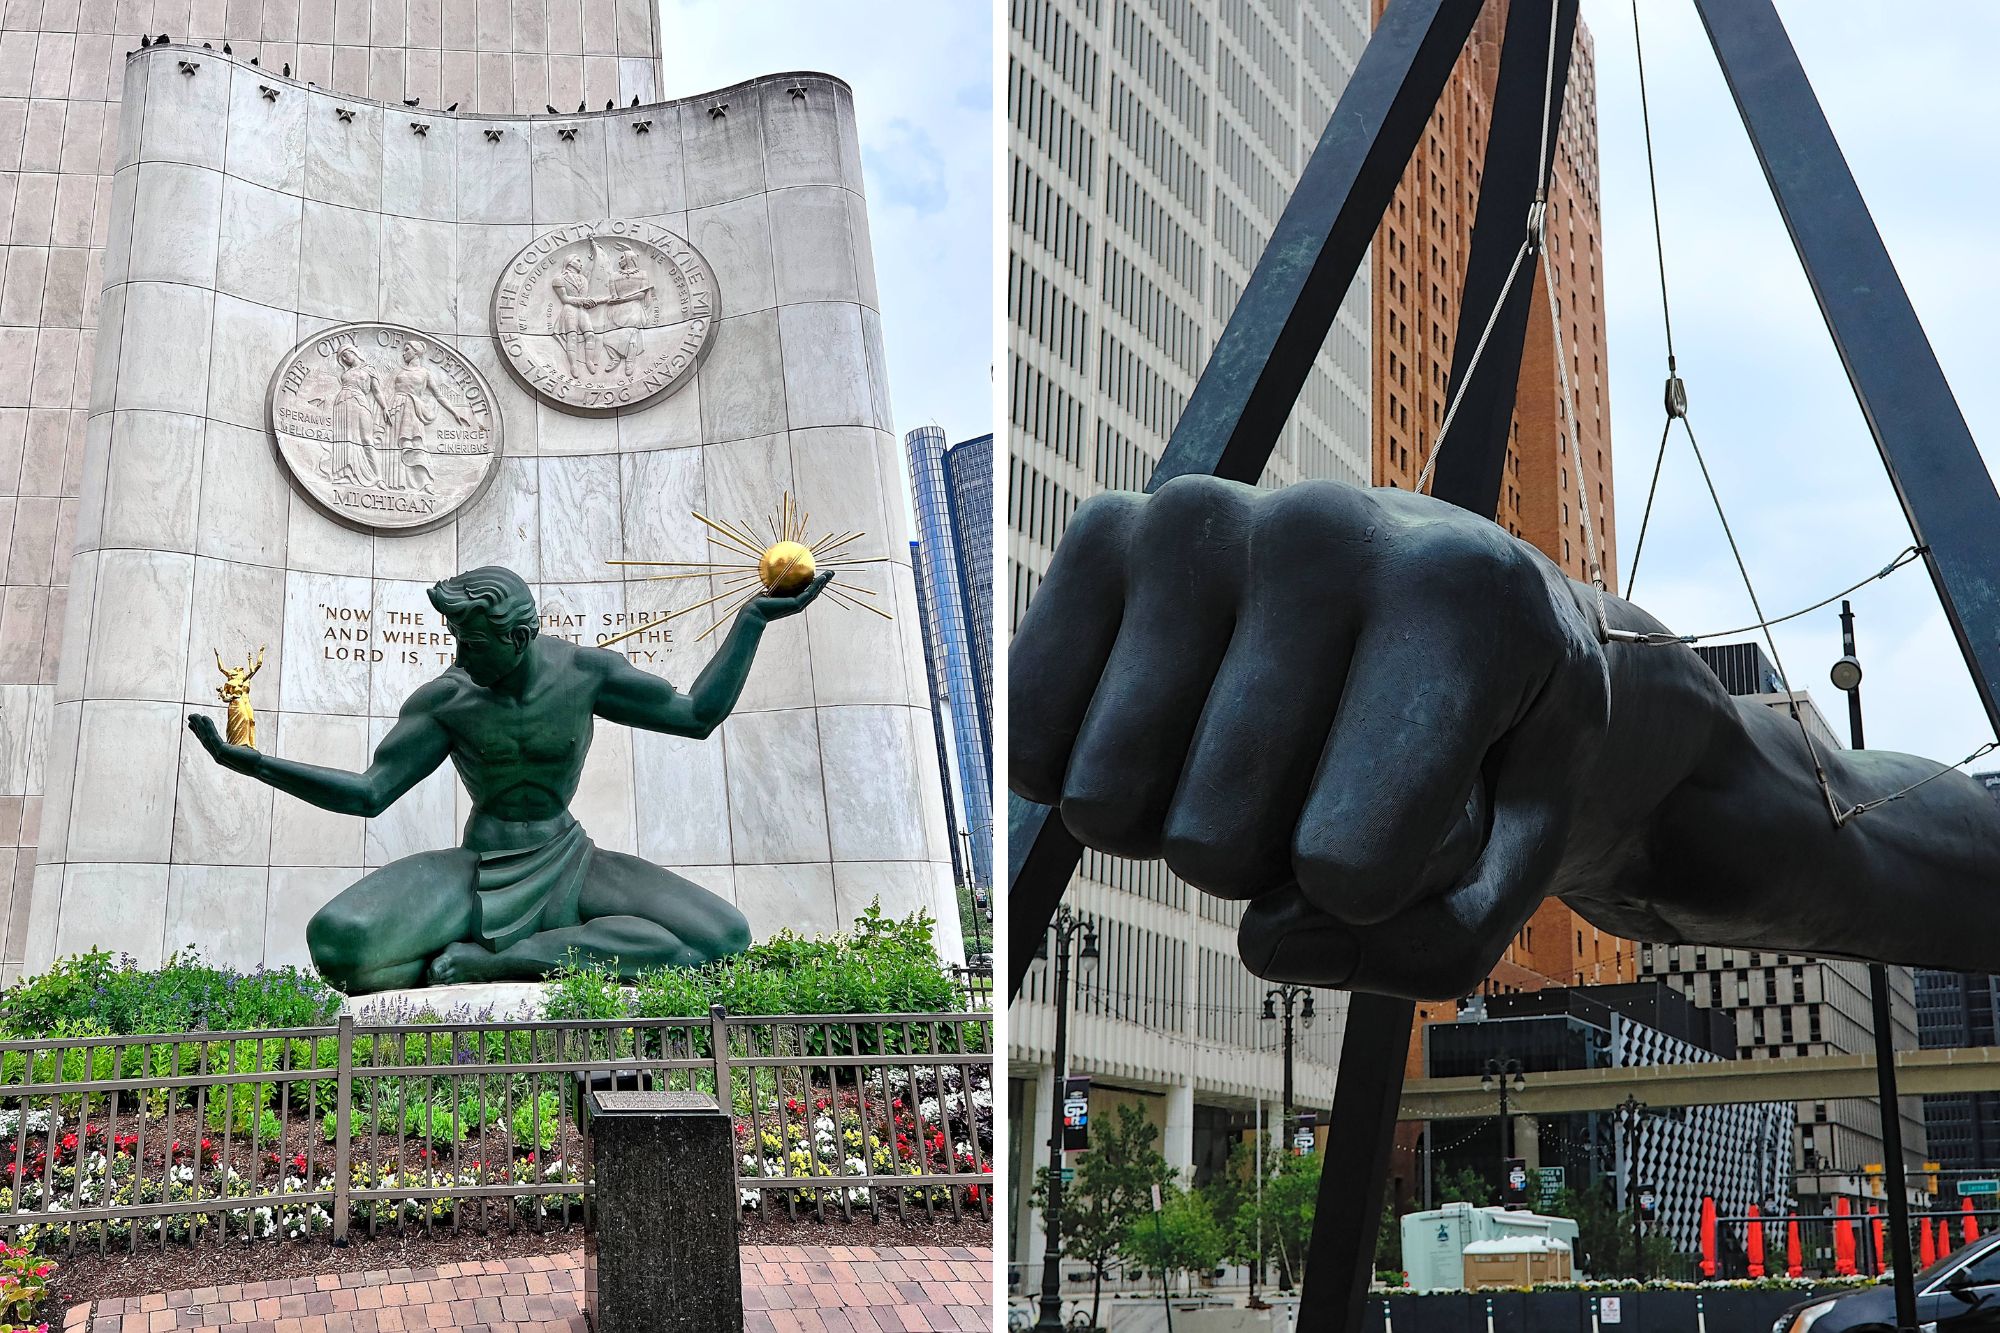 two images of sculptures in Detroit: The Spirit of Detroit and the Monument to Joe Louis “The Fist”